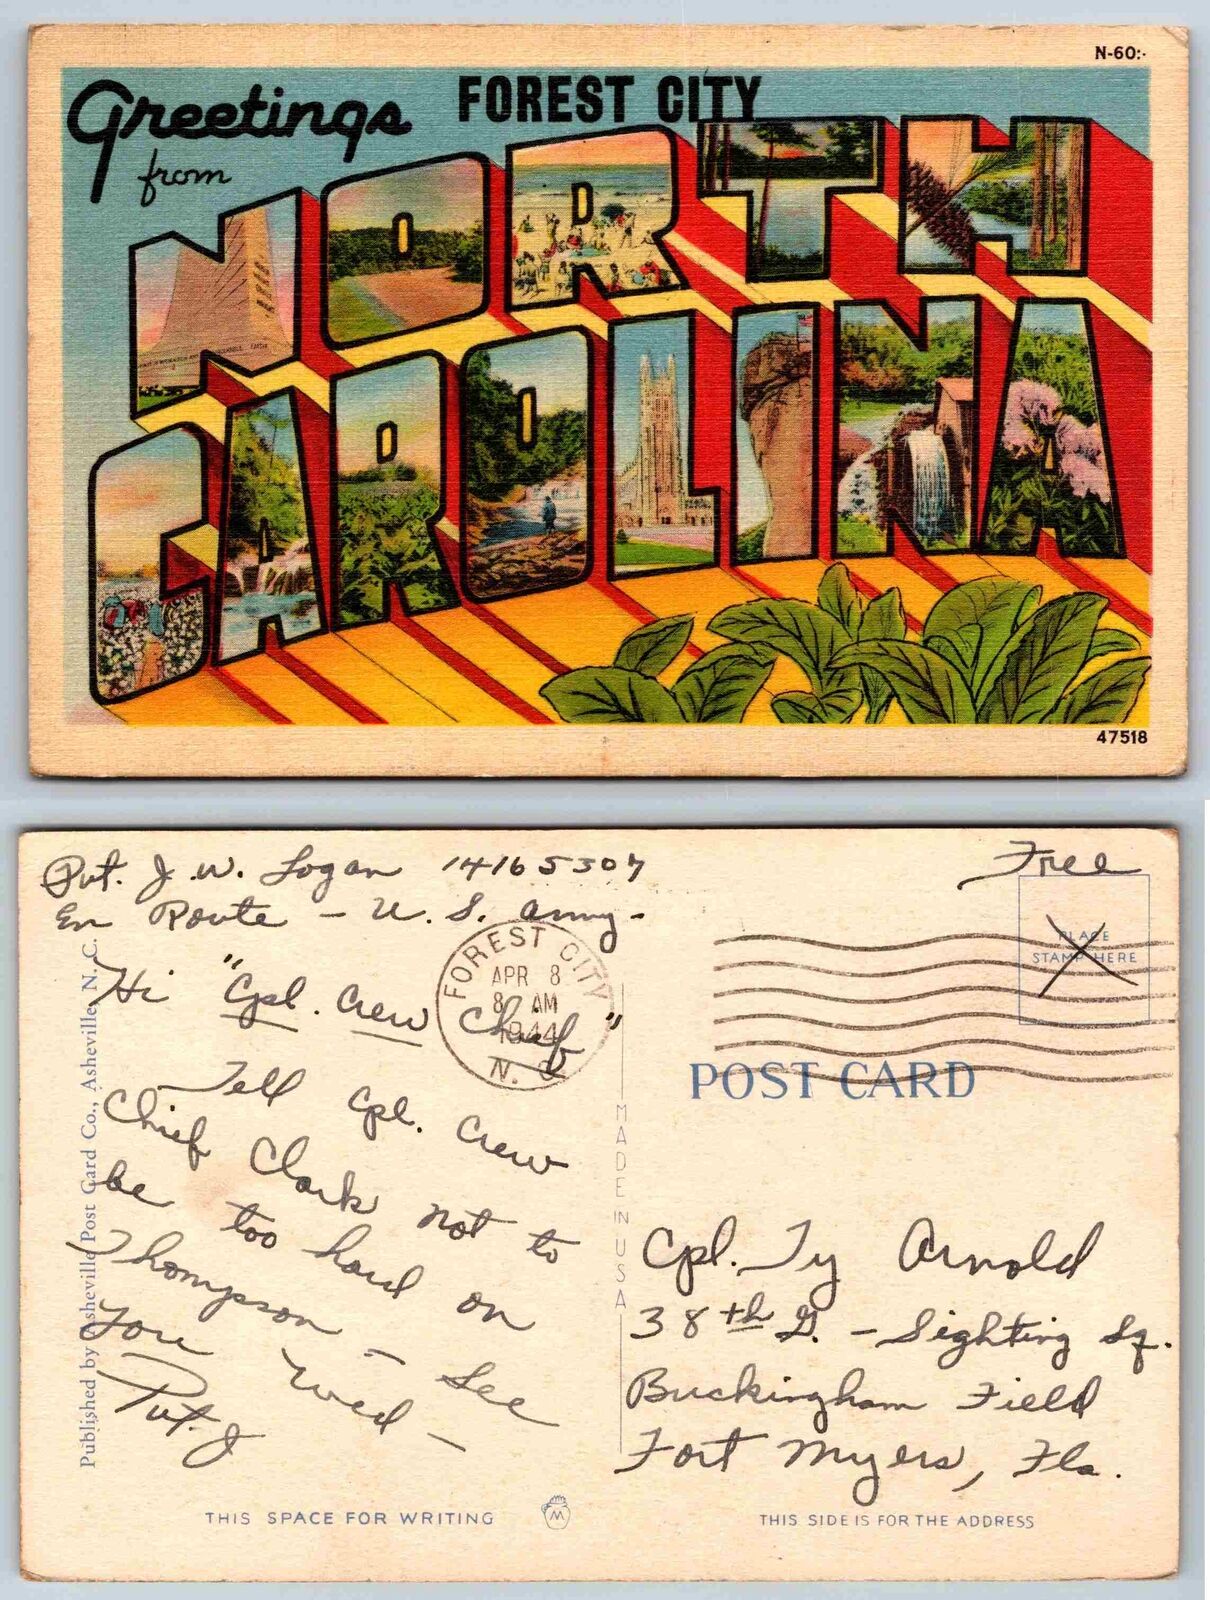 postcard - Greetings from Forrest City. North Carolina - 1944